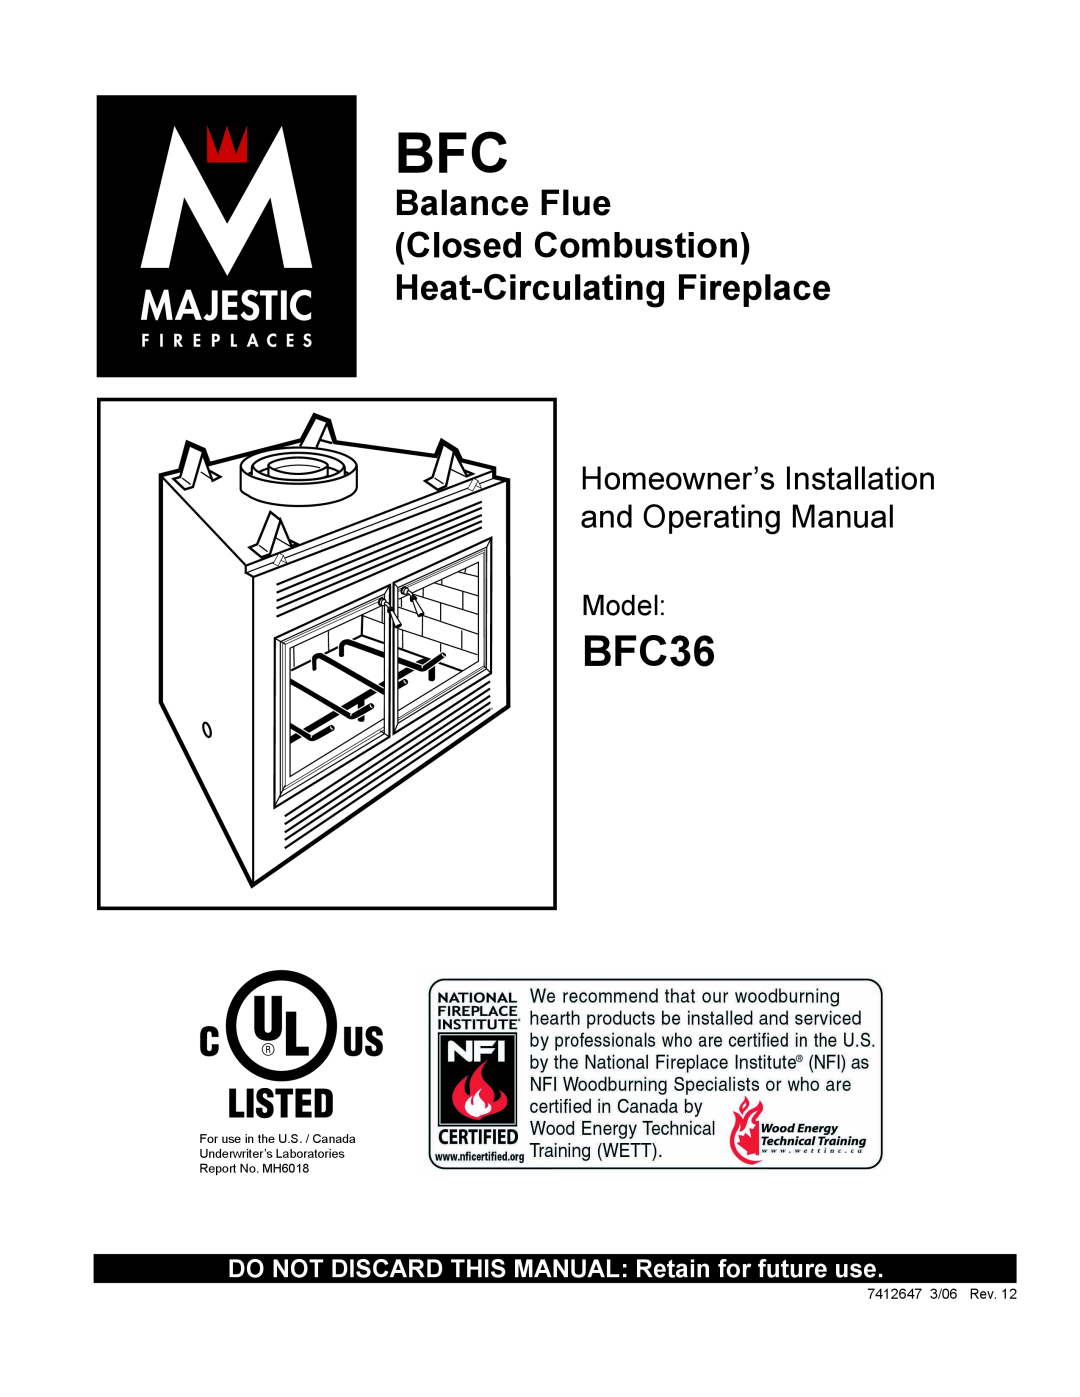 Vermont Casting BFC36 manual DO NOT DISCARD THIS MANUAL Retain for future use, Balance Flue Closed Combustion, Model 